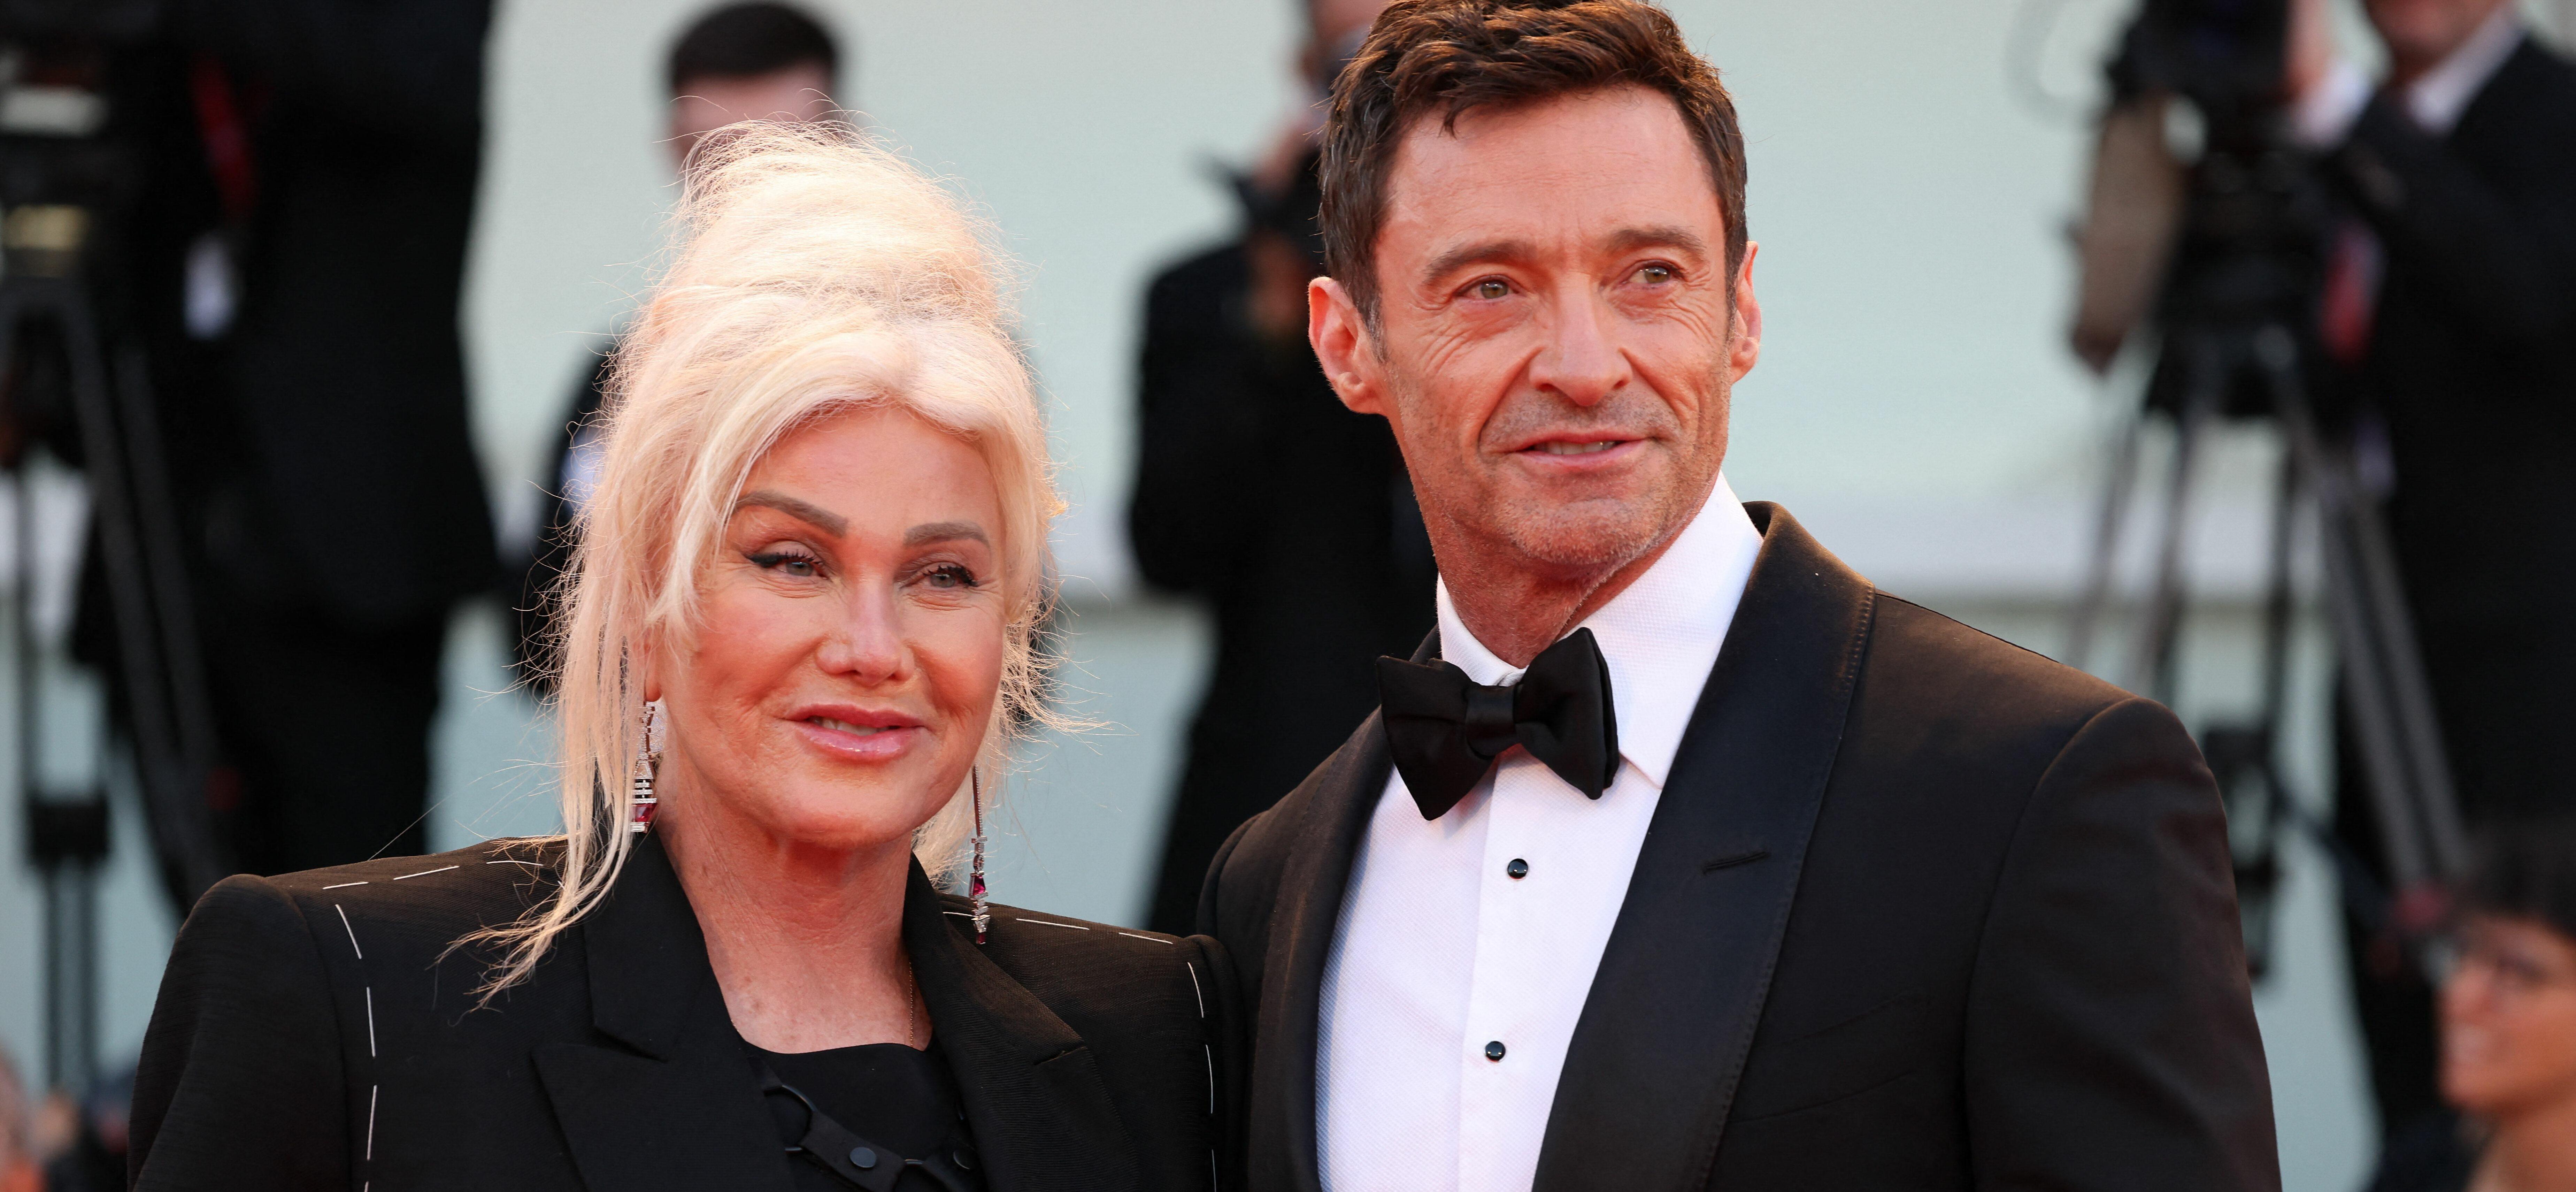 Hugh Jackman and Deborra-Lee Furness attend "The Son" red carpet at the 79th Venice International Film Festival